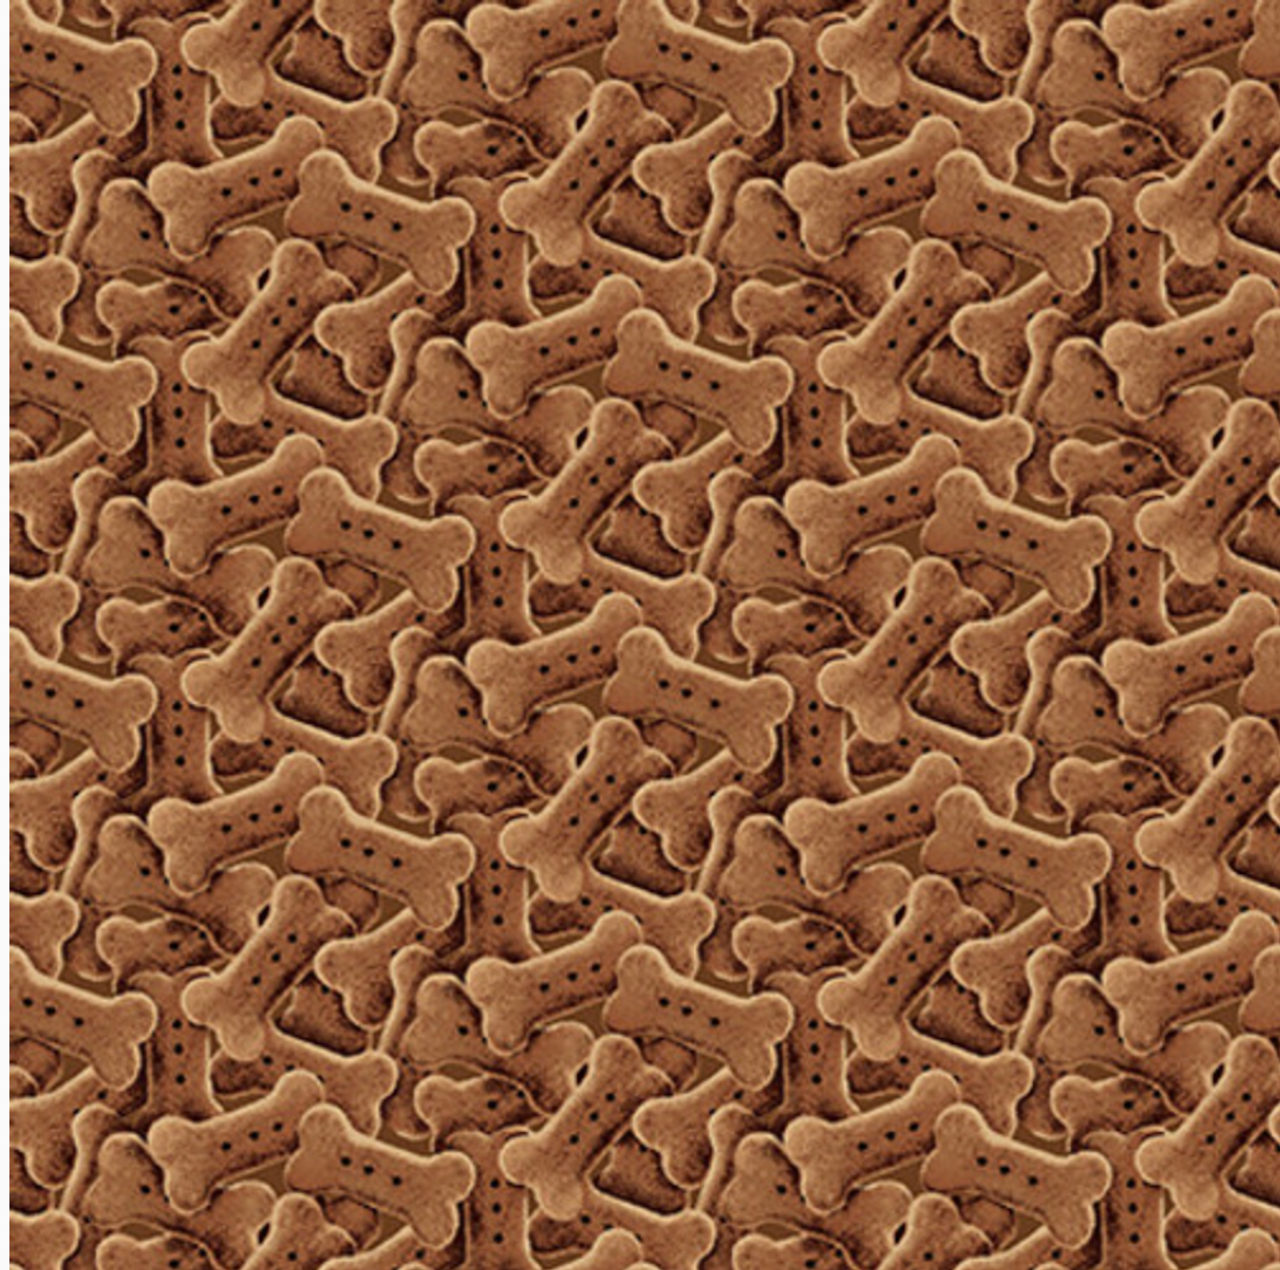 Studio E Off the Leash Tossed Dogs Treats Brown Fabric By The Yard